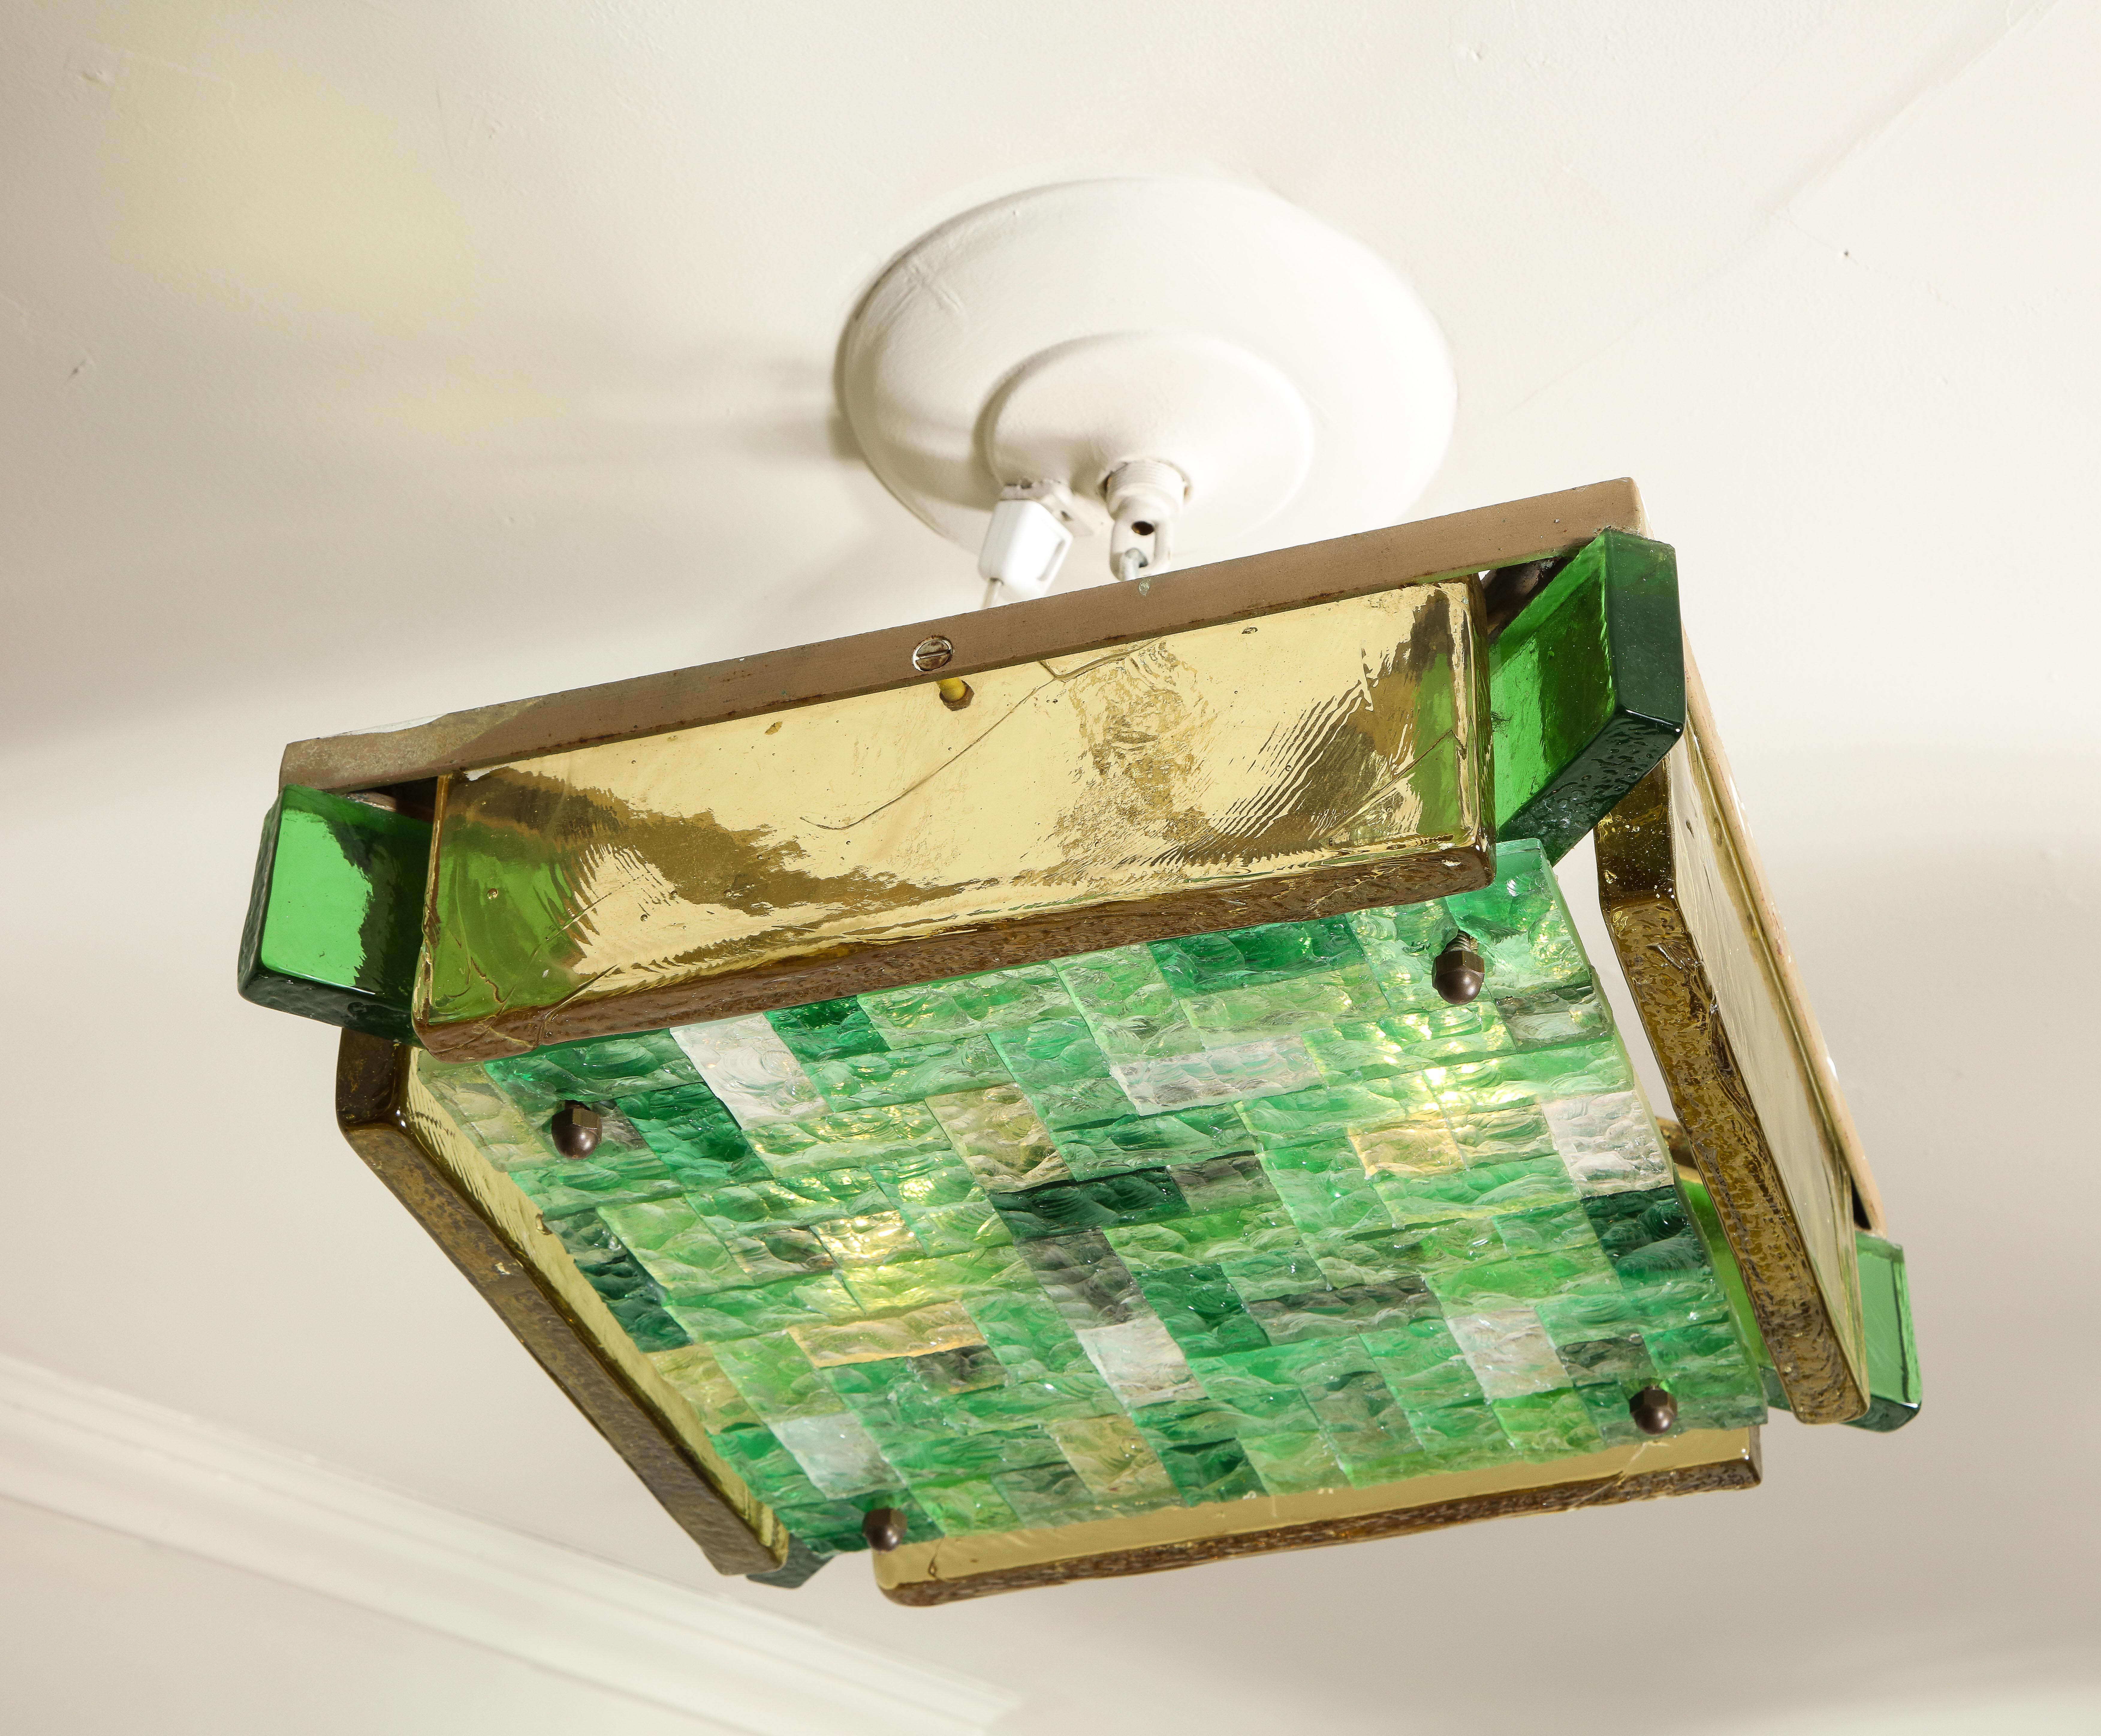 One-of-a-kind 1970s Italian Flushmount ceiling light by Poliarte is available for immediate purchase. Two Sockets. Thick chiseled polychrome glass.